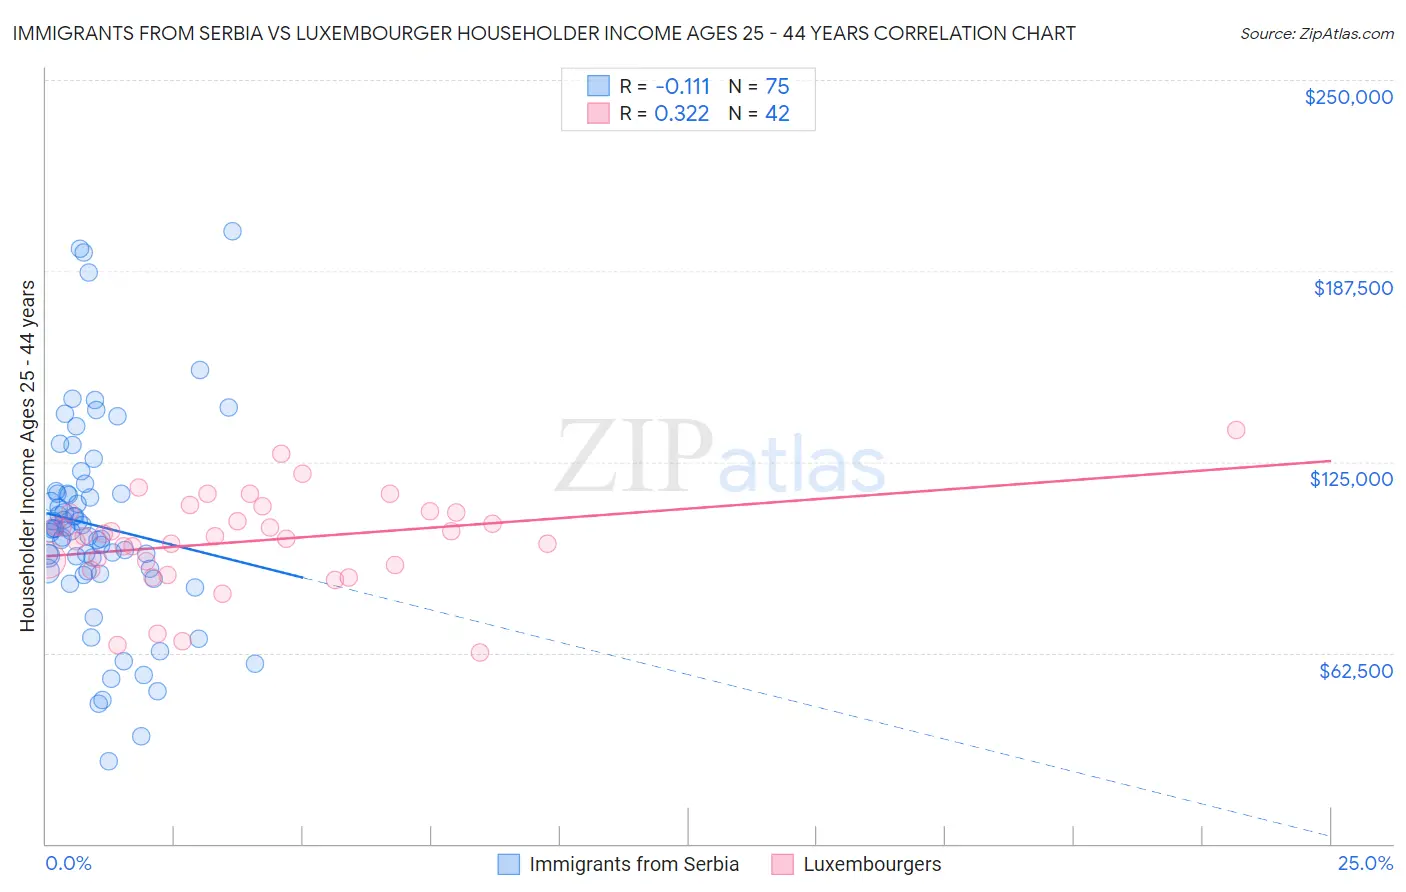 Immigrants from Serbia vs Luxembourger Householder Income Ages 25 - 44 years